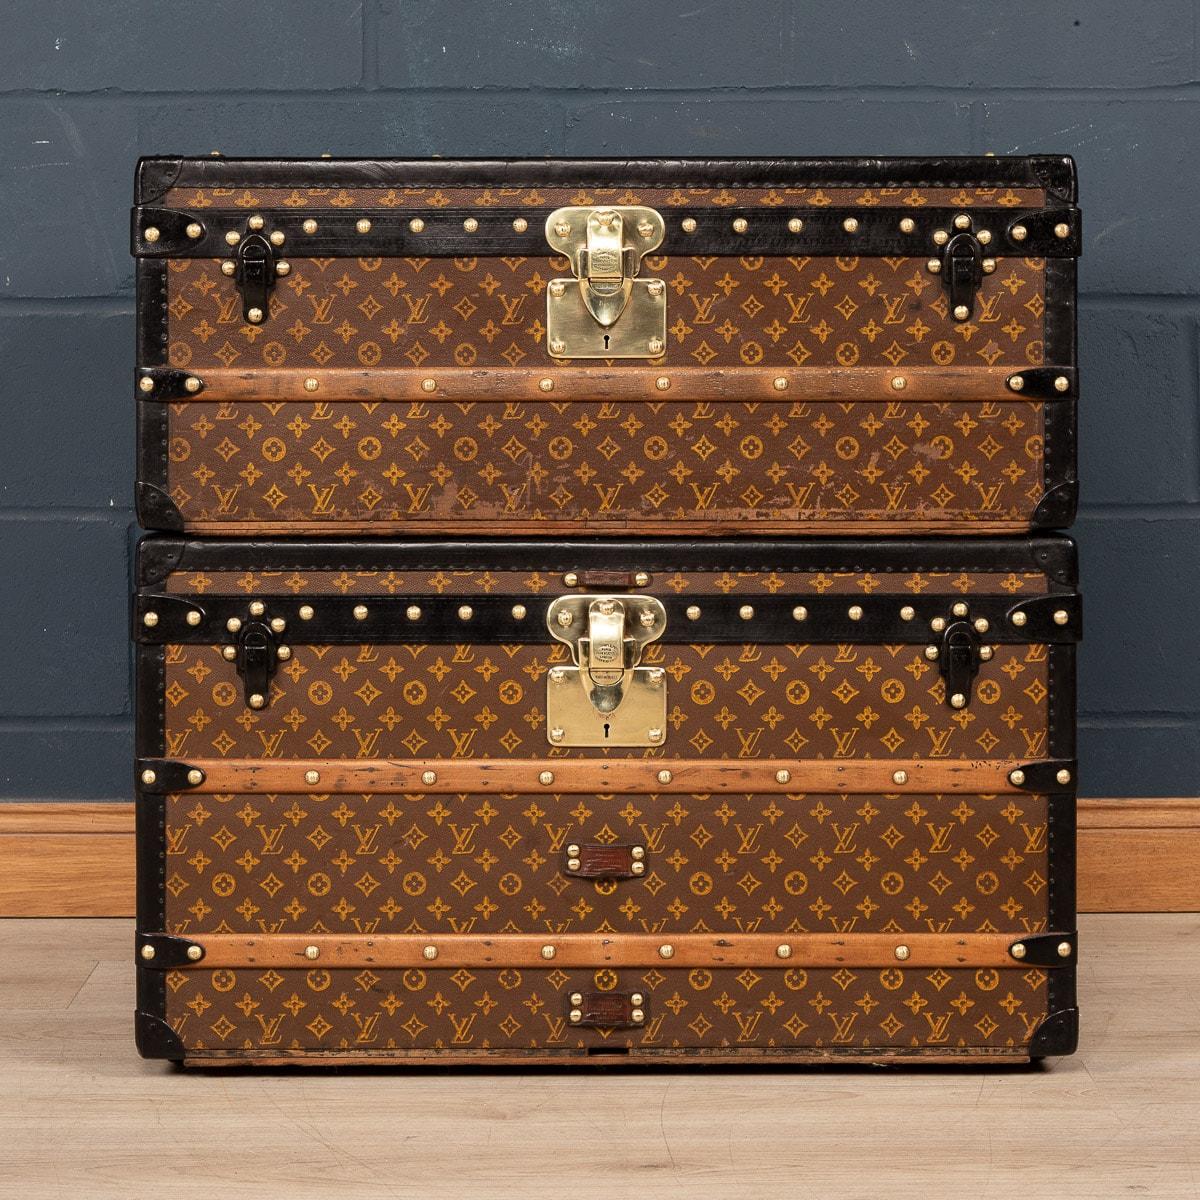 A wonderful graduated pair of early 20th century Louis Vuitton trunk in the world famous monogrammed LV canvas. Complete with all its interior trays on the larger of the two trunks, these trunks are in very good condition and hark back to times of